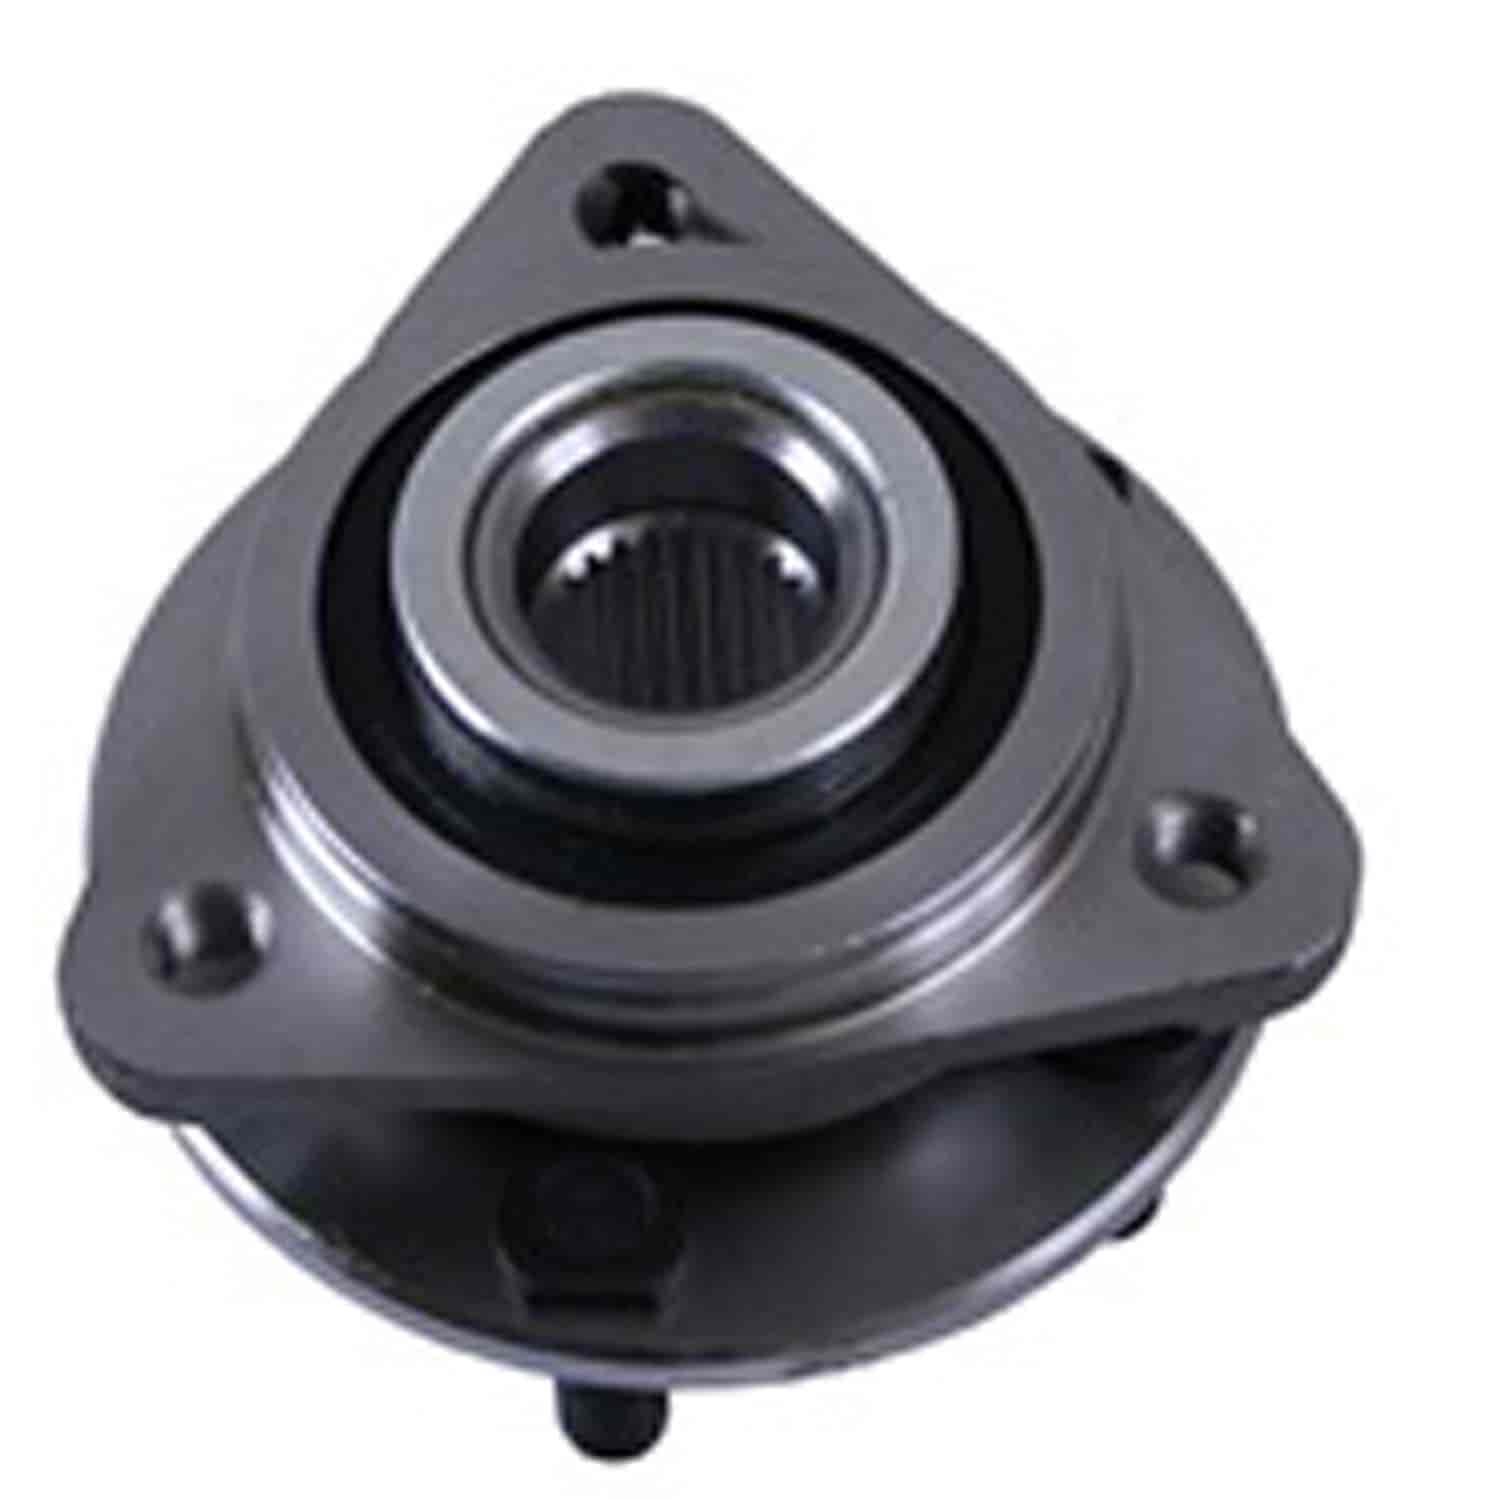 This front axle hub assembly from Omix-ADA fits 95-00 Chrysler Cirrus 96-06 Chrysler Sebrings 95-06